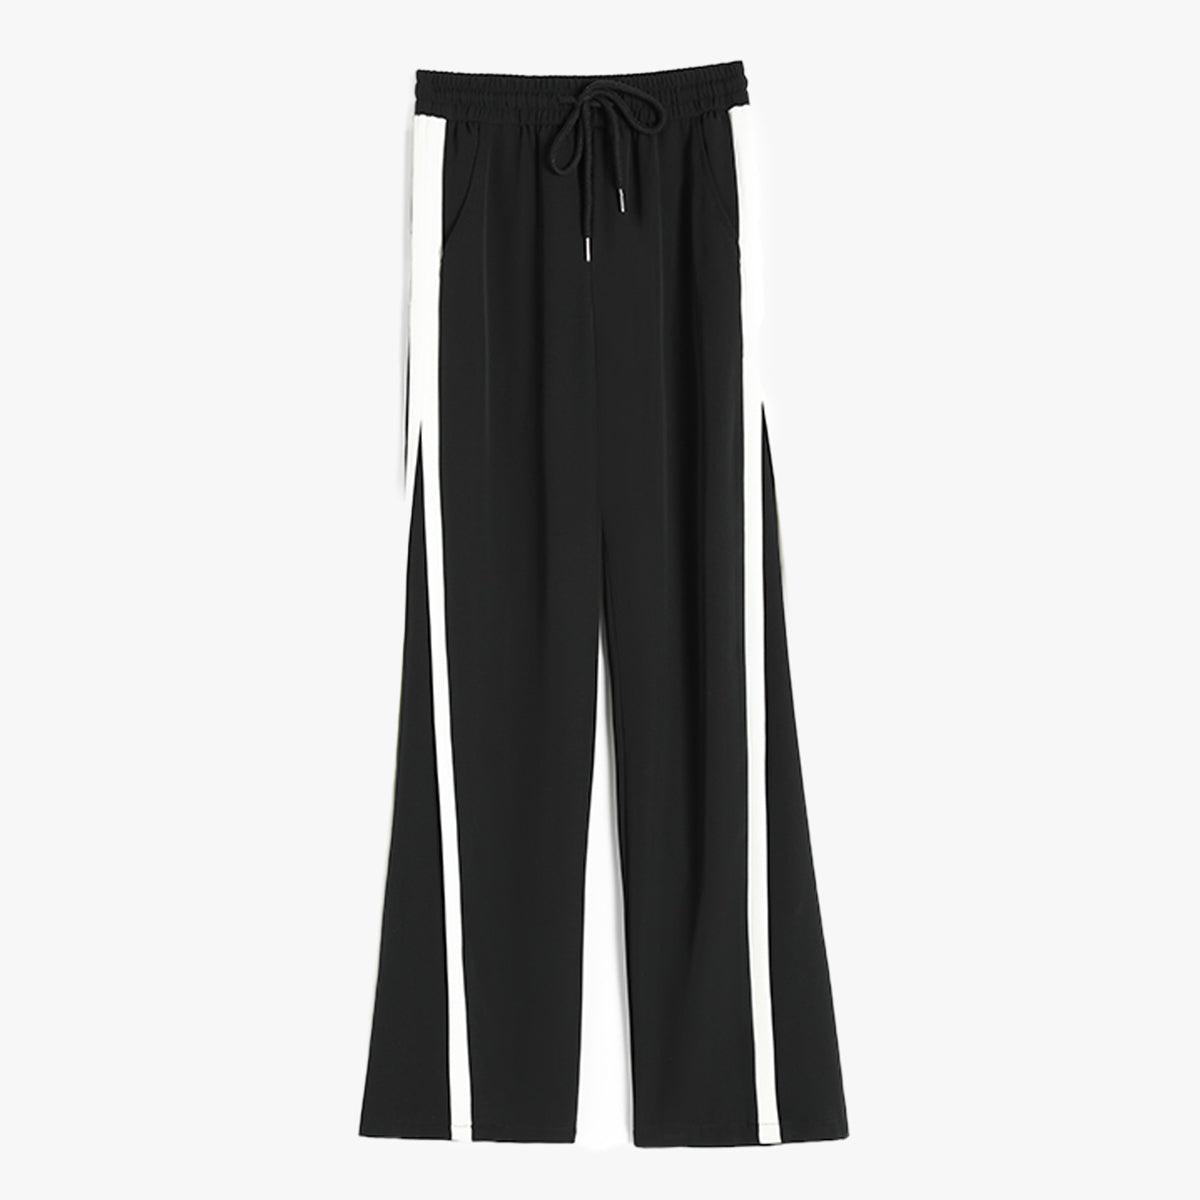 Black Sporty Side Lined Pants - Aesthetic Clothes Shop